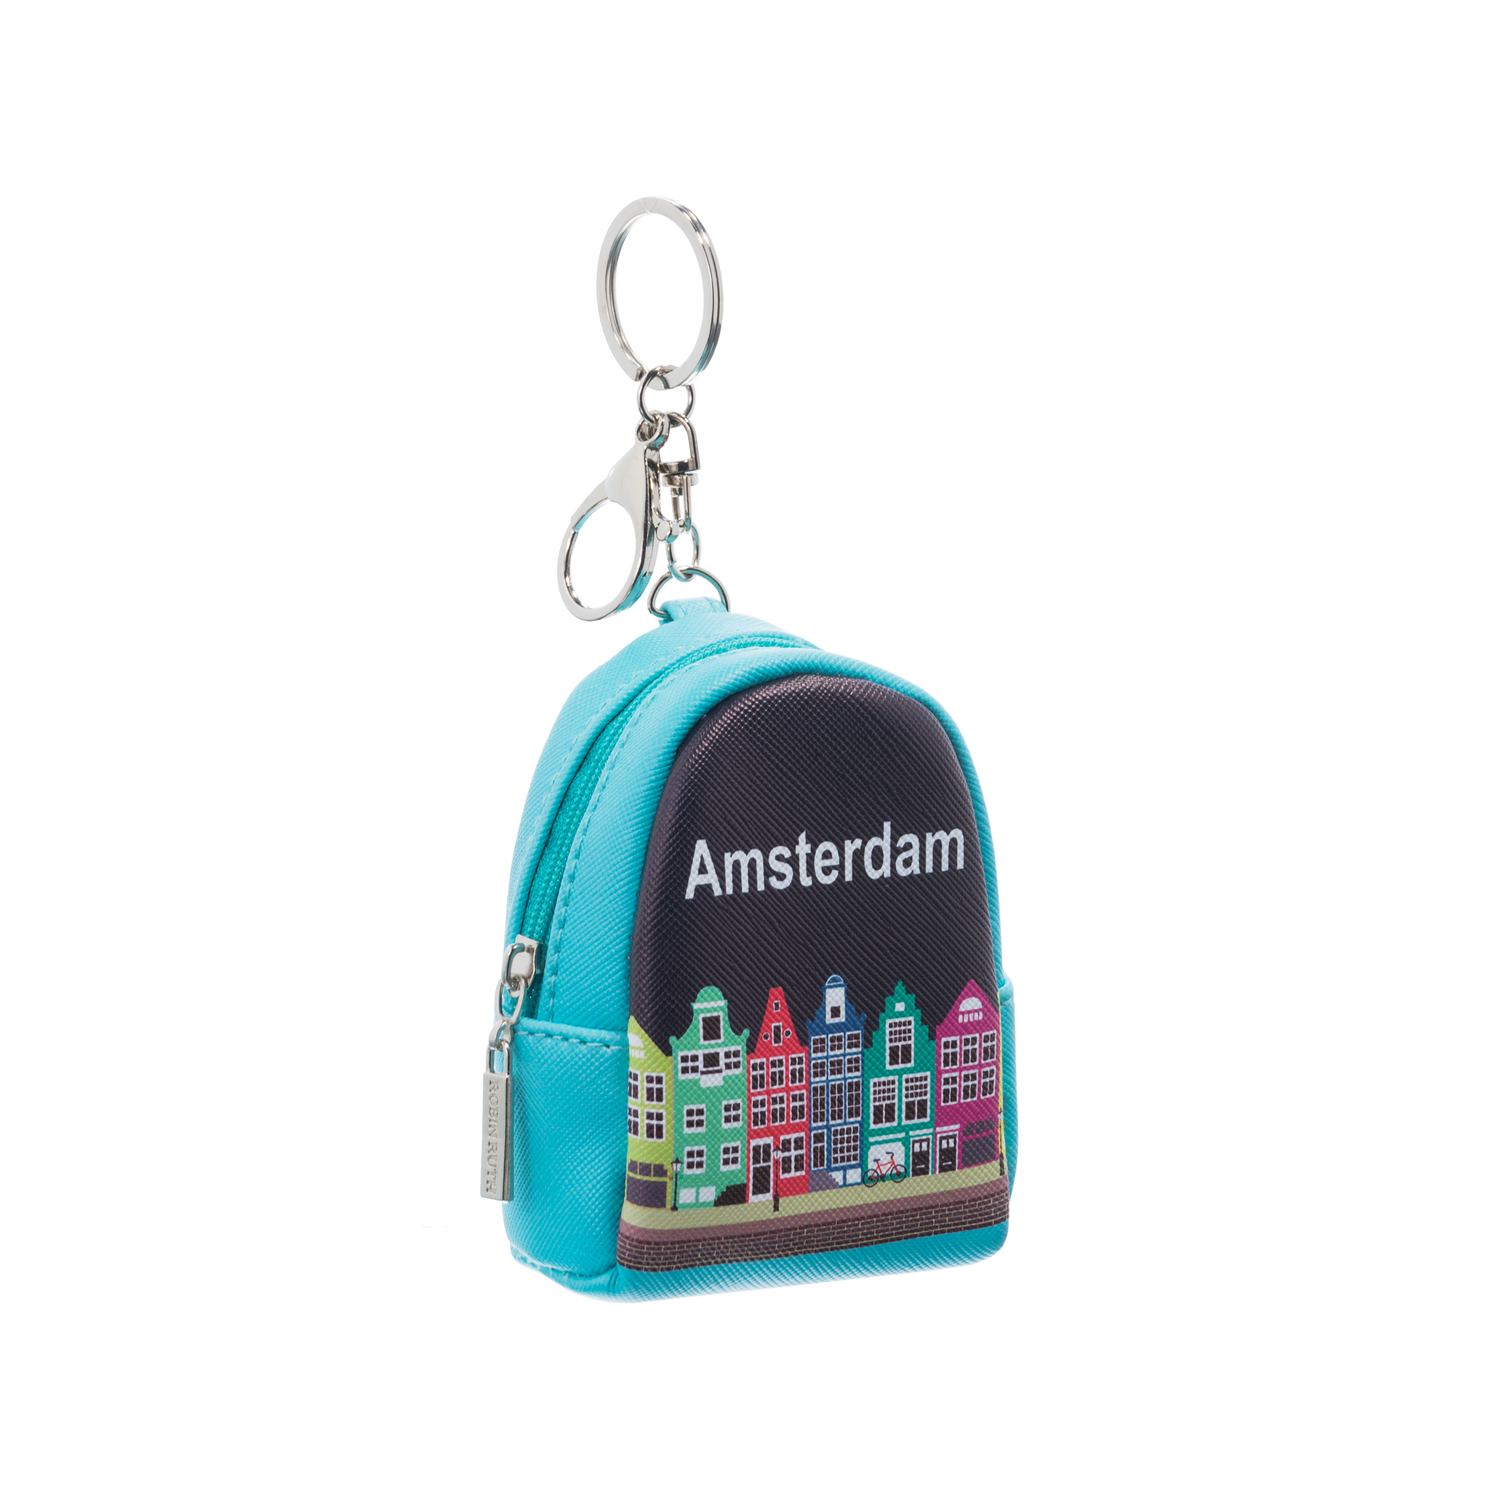 Quinty S - Wallet / Keyholder - Amsterdam - Houses